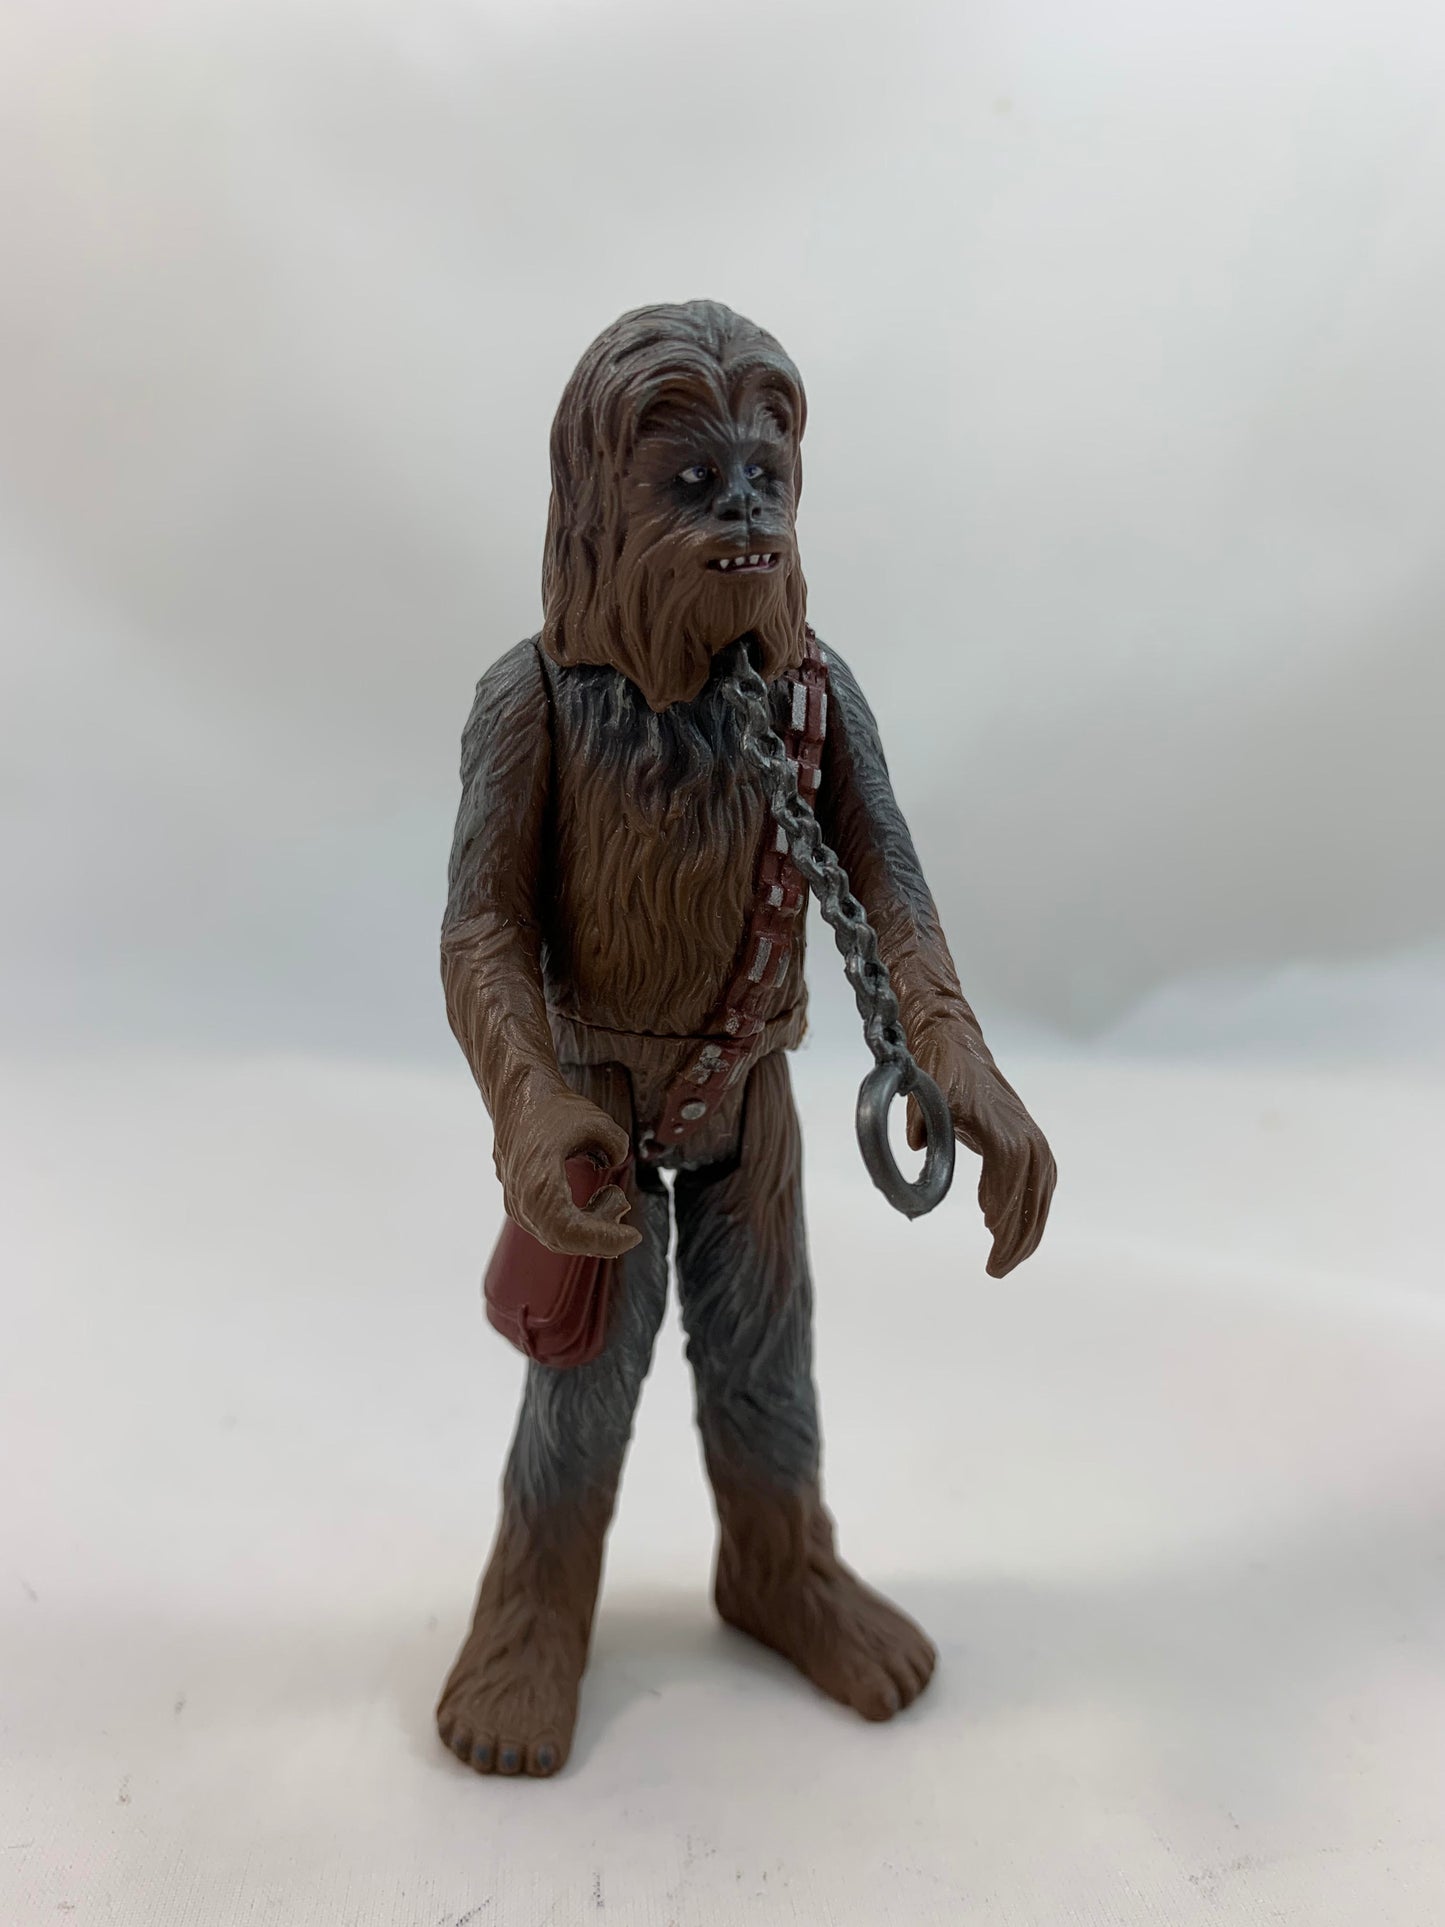 Kenner Star Wars ROTJ: Return of the Jedi Chewbacca (Boushh's Bounty) with Bowcaster The Power Of The Force Green Card 1998 - Loose